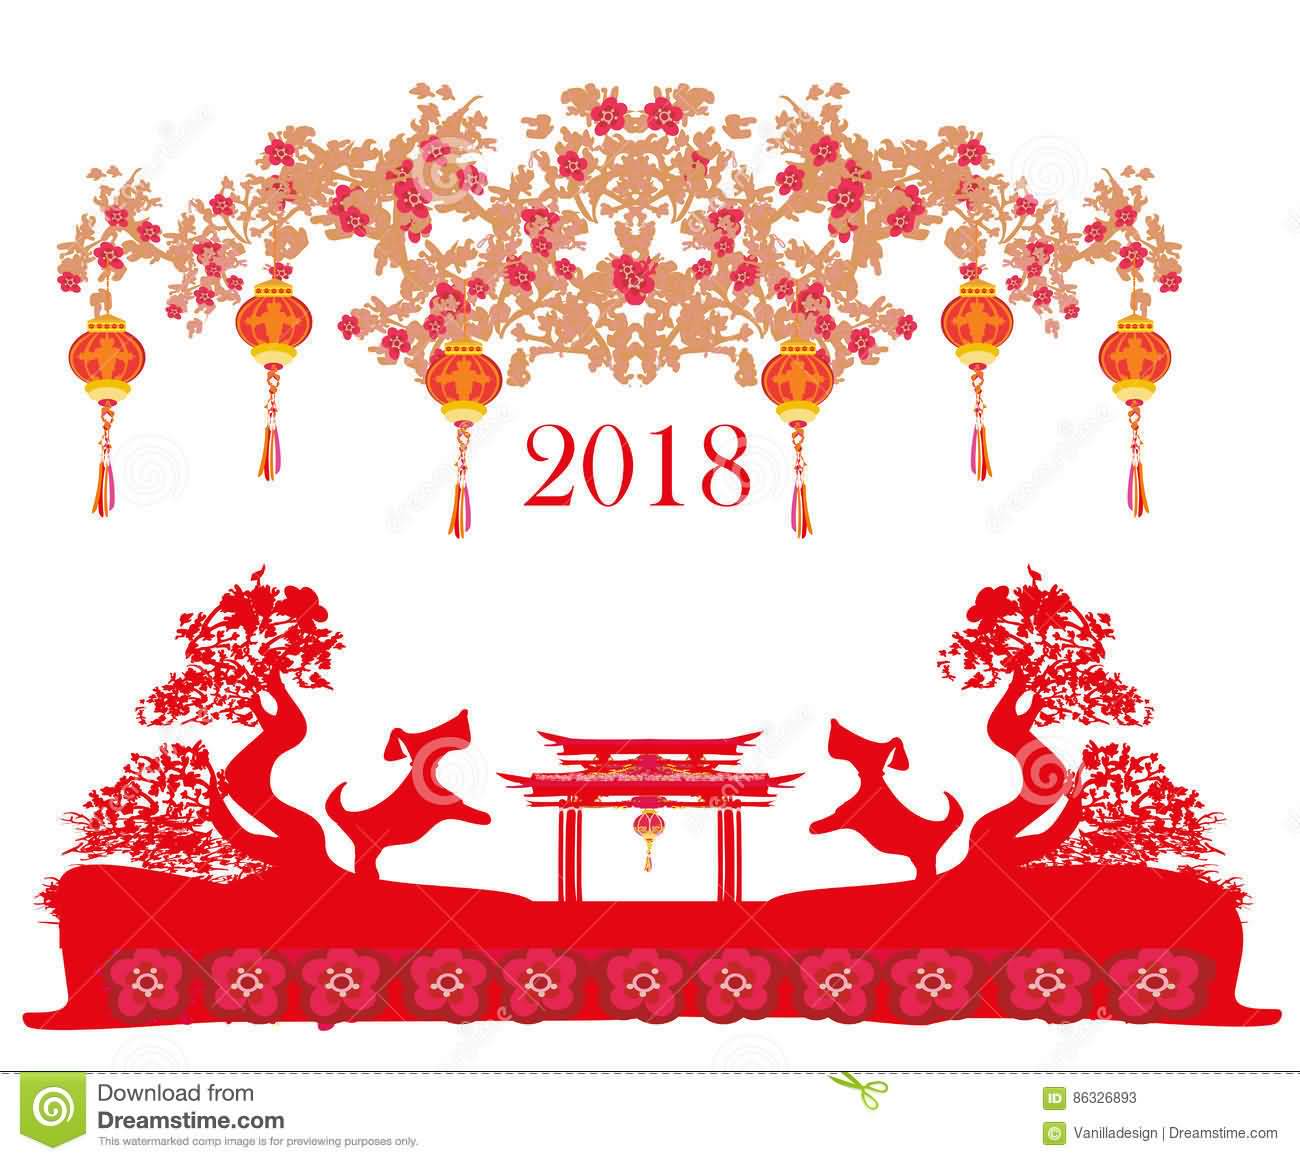 Happy Chinese New Year 2018 Cards Image Picture Photo Wallpaper 04